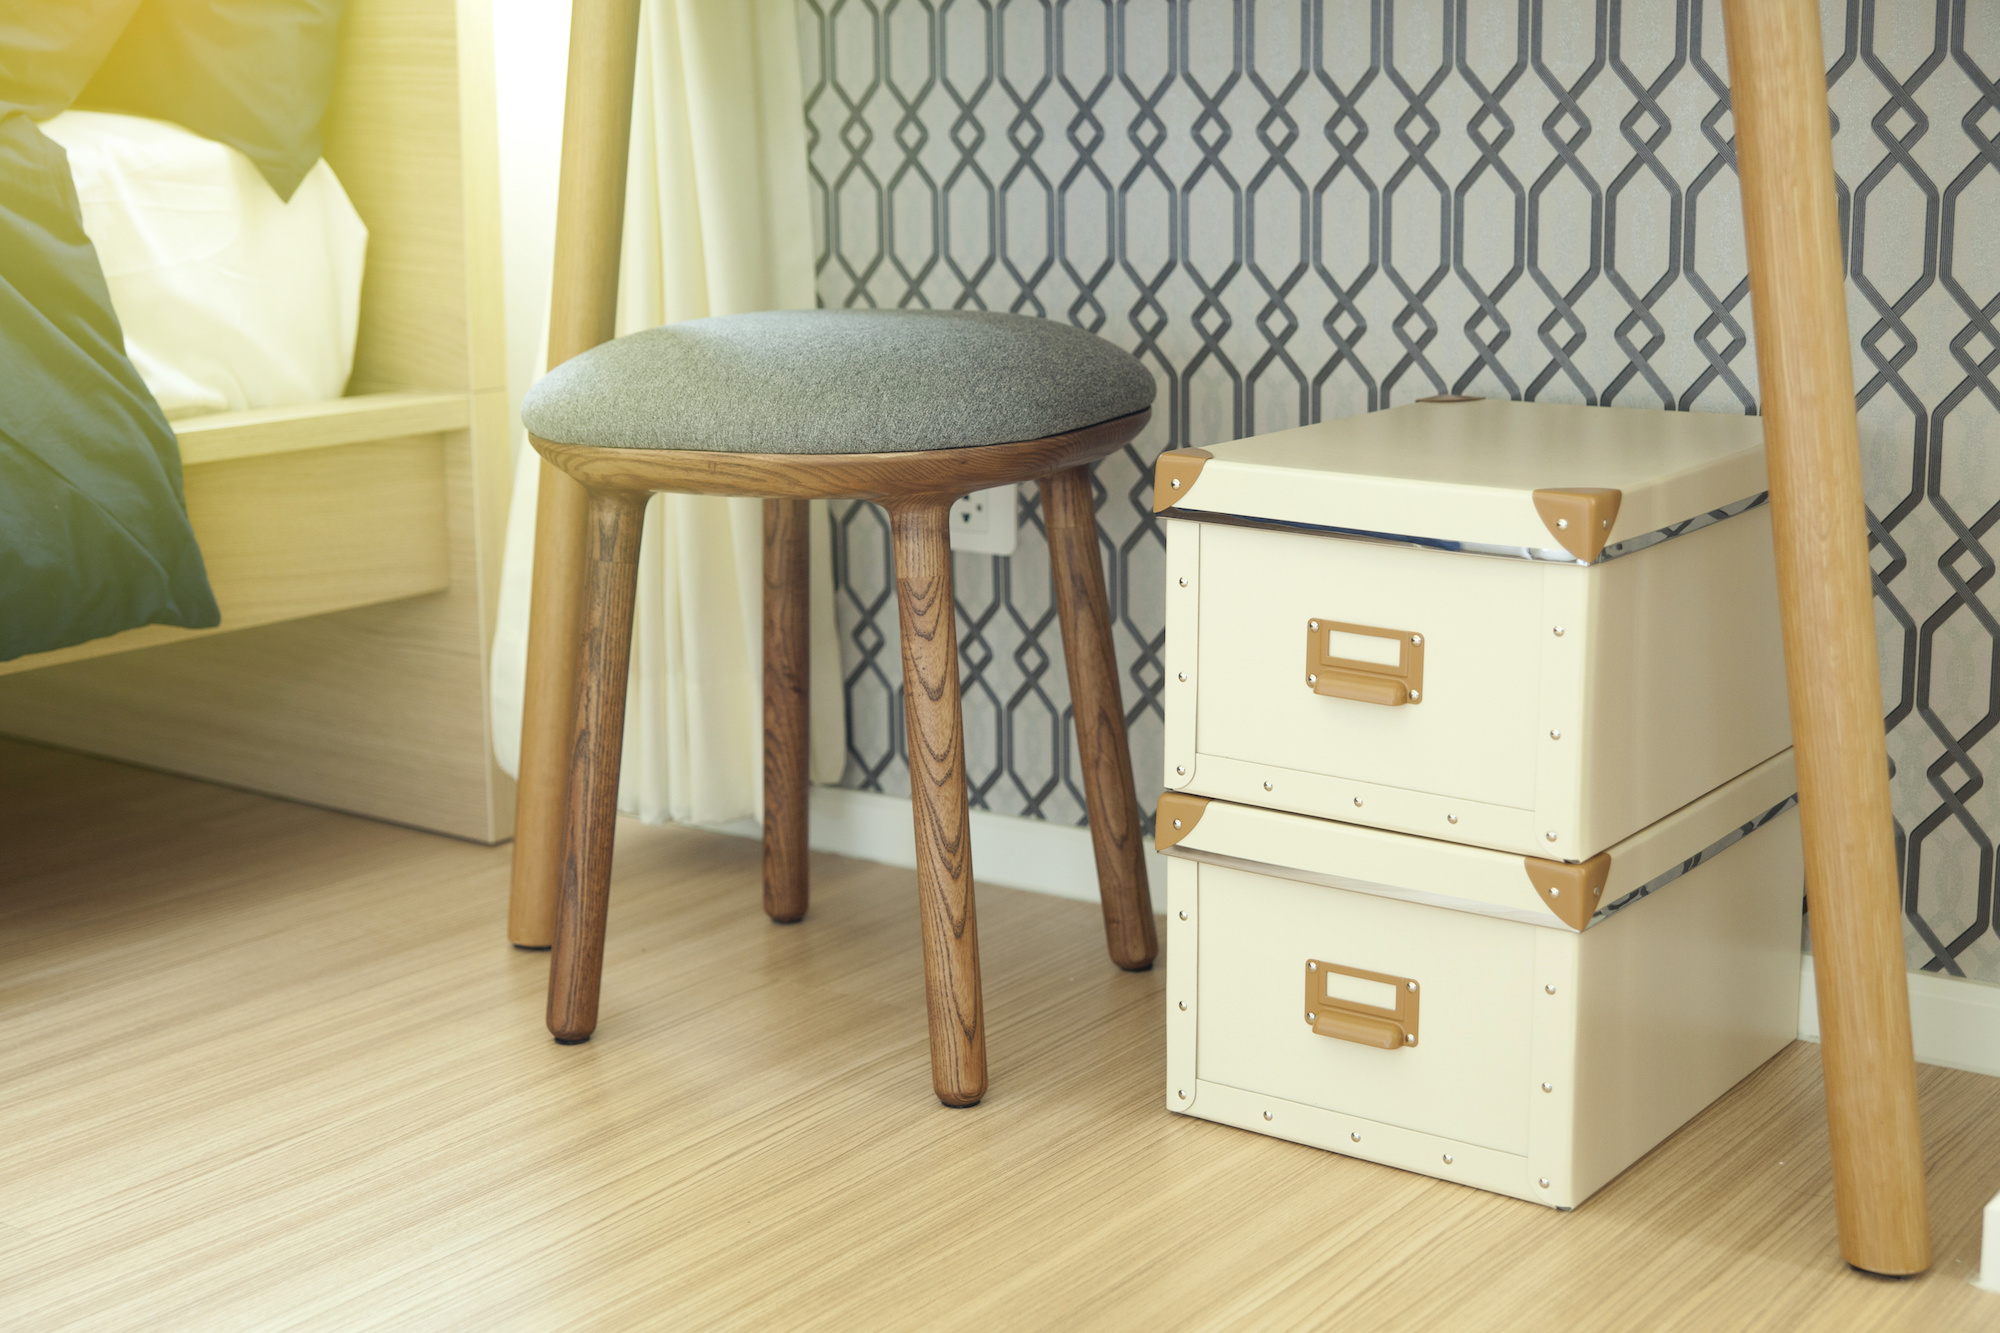 Two small storage boxes sit under a side table.